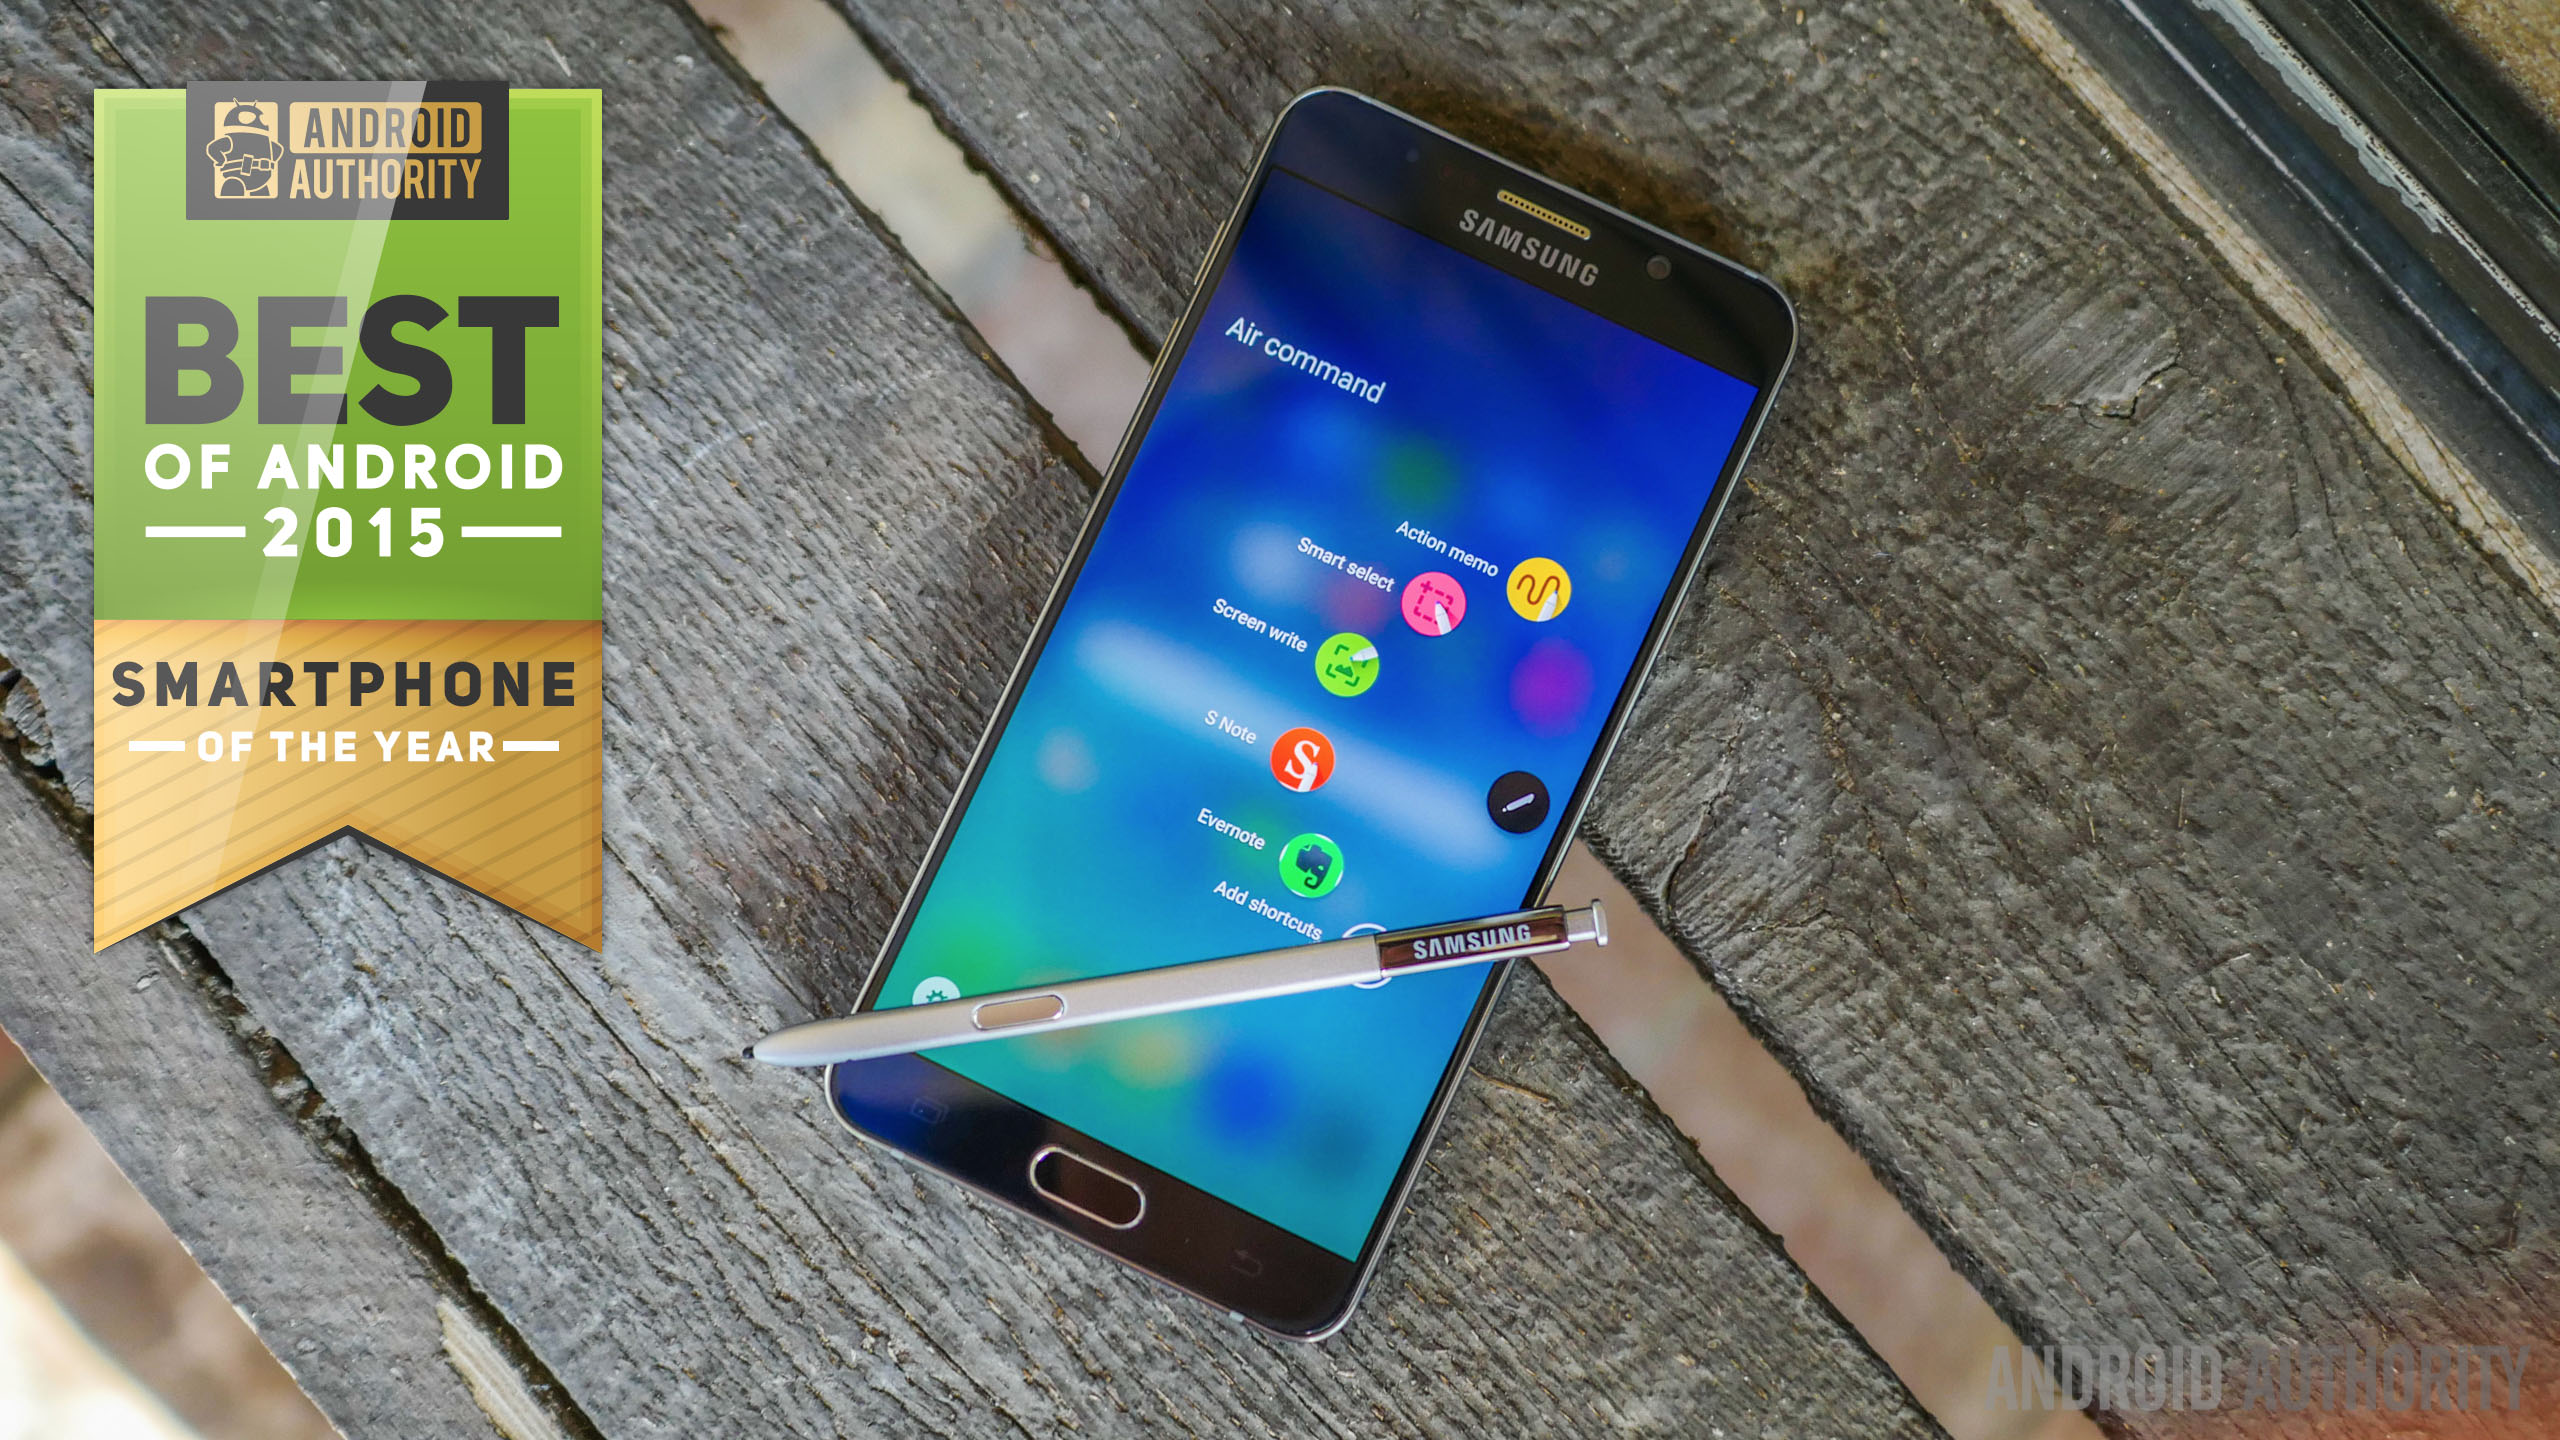 Samsung Galaxy Note 5 Best Android Phone of the Year